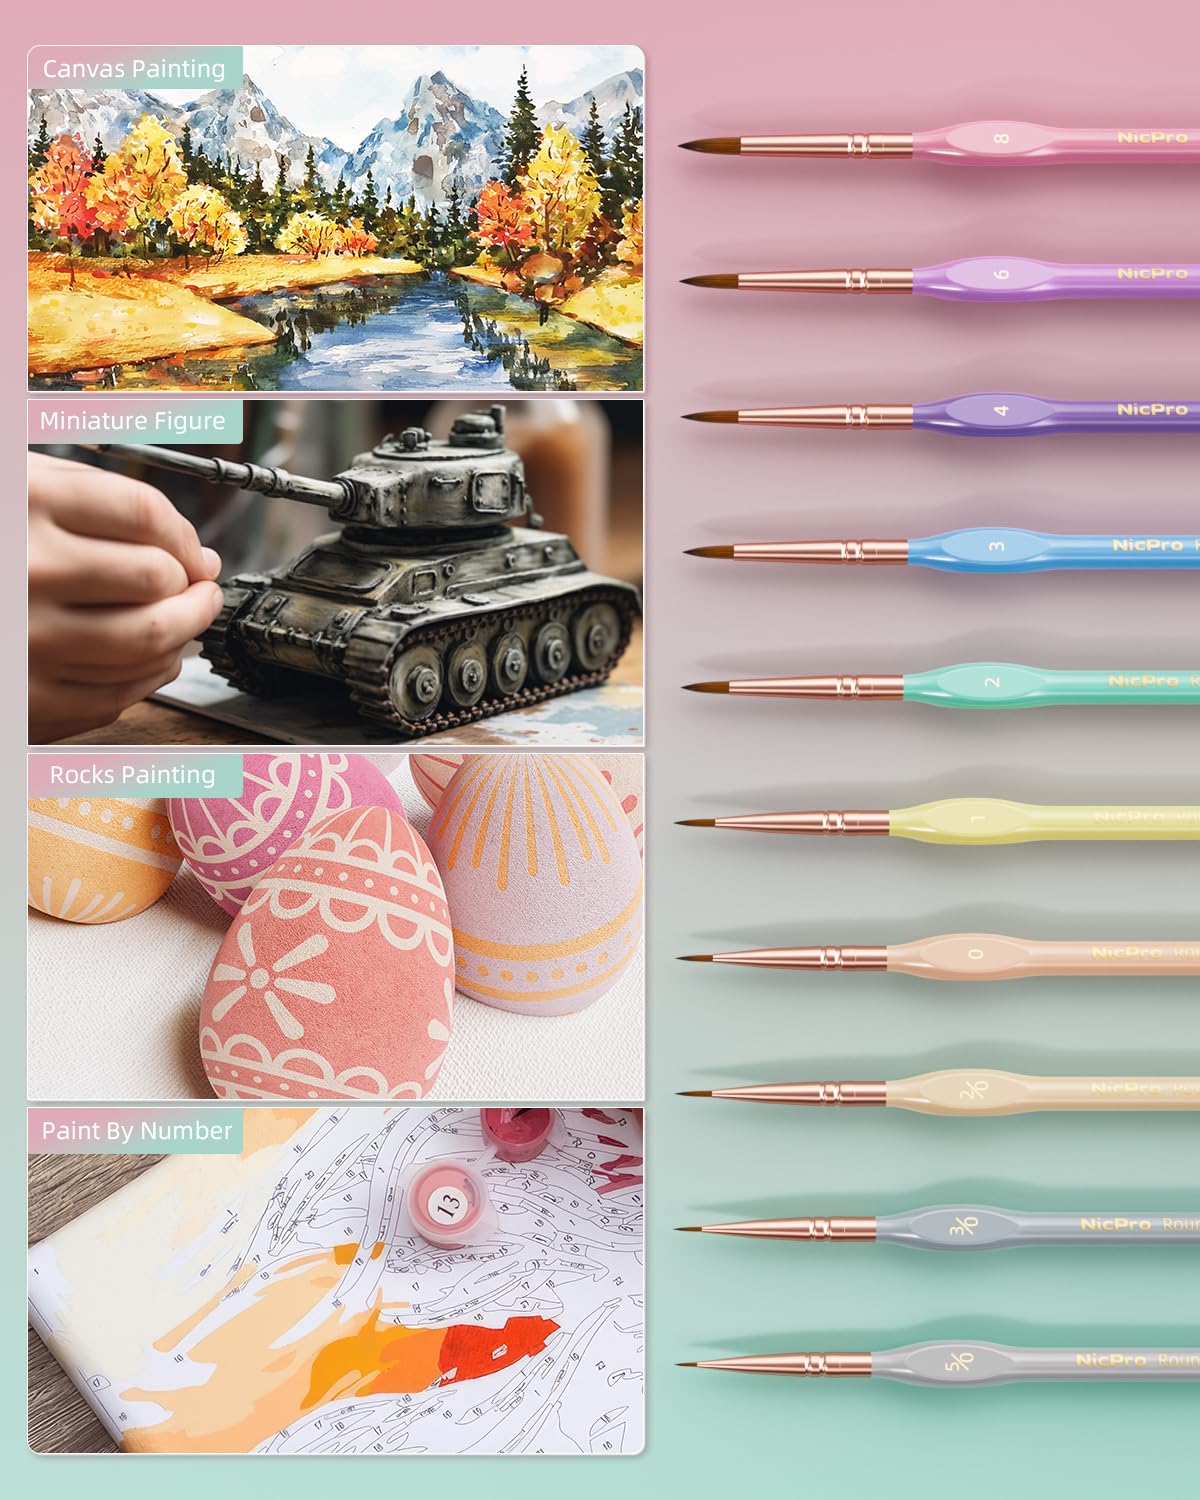 Nicpro 10PCS Micro Fine Detail Paint Brush Set, Macaron Pastel Small Miniature Fine Tip Detail Brushes Kit for Acrylic Oil Watercolor, Craft, Models, Rock Painting, Paint by Number